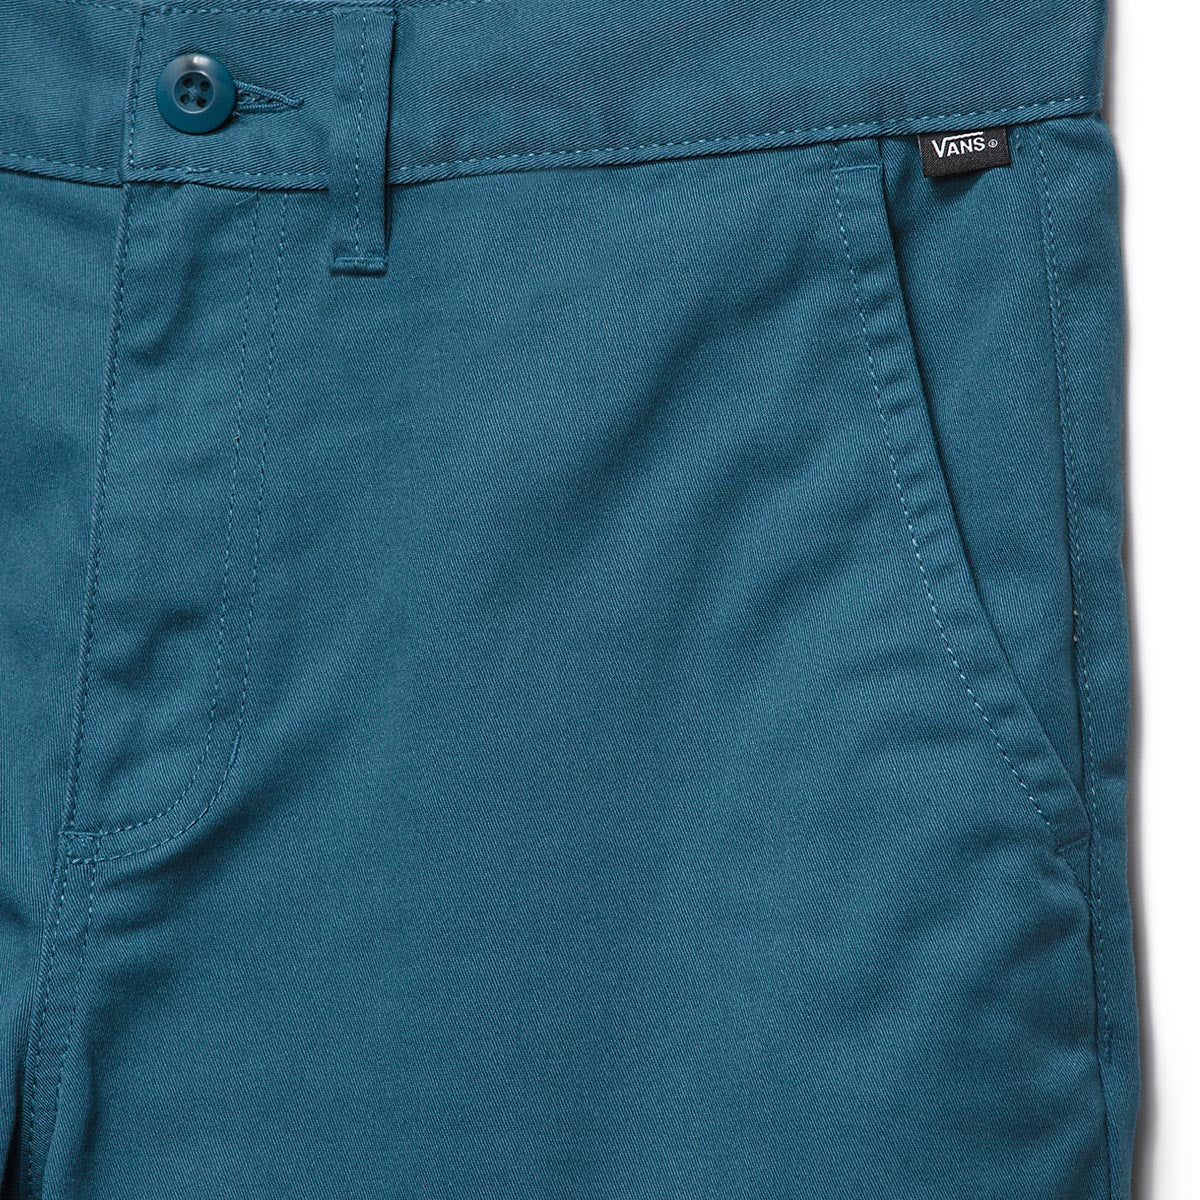 M Authentic Chino Relaxed Short SP23